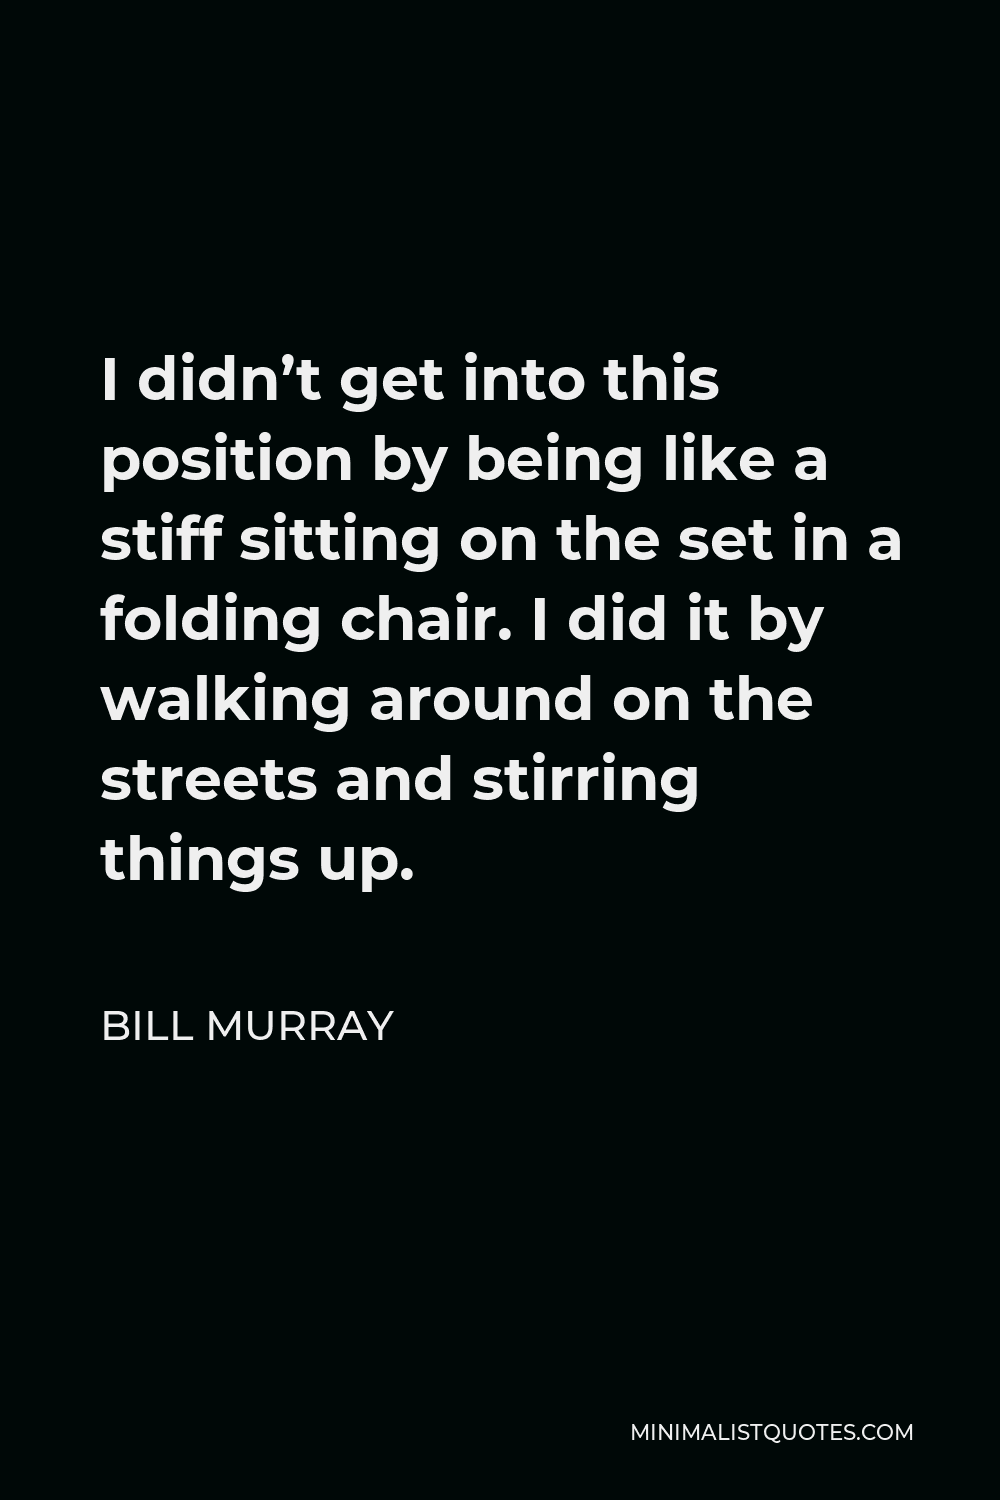 Bill Murray Quote - I didn’t get into this position by being like a stiff sitting on the set in a folding chair. I did it by walking around on the streets and stirring things up.